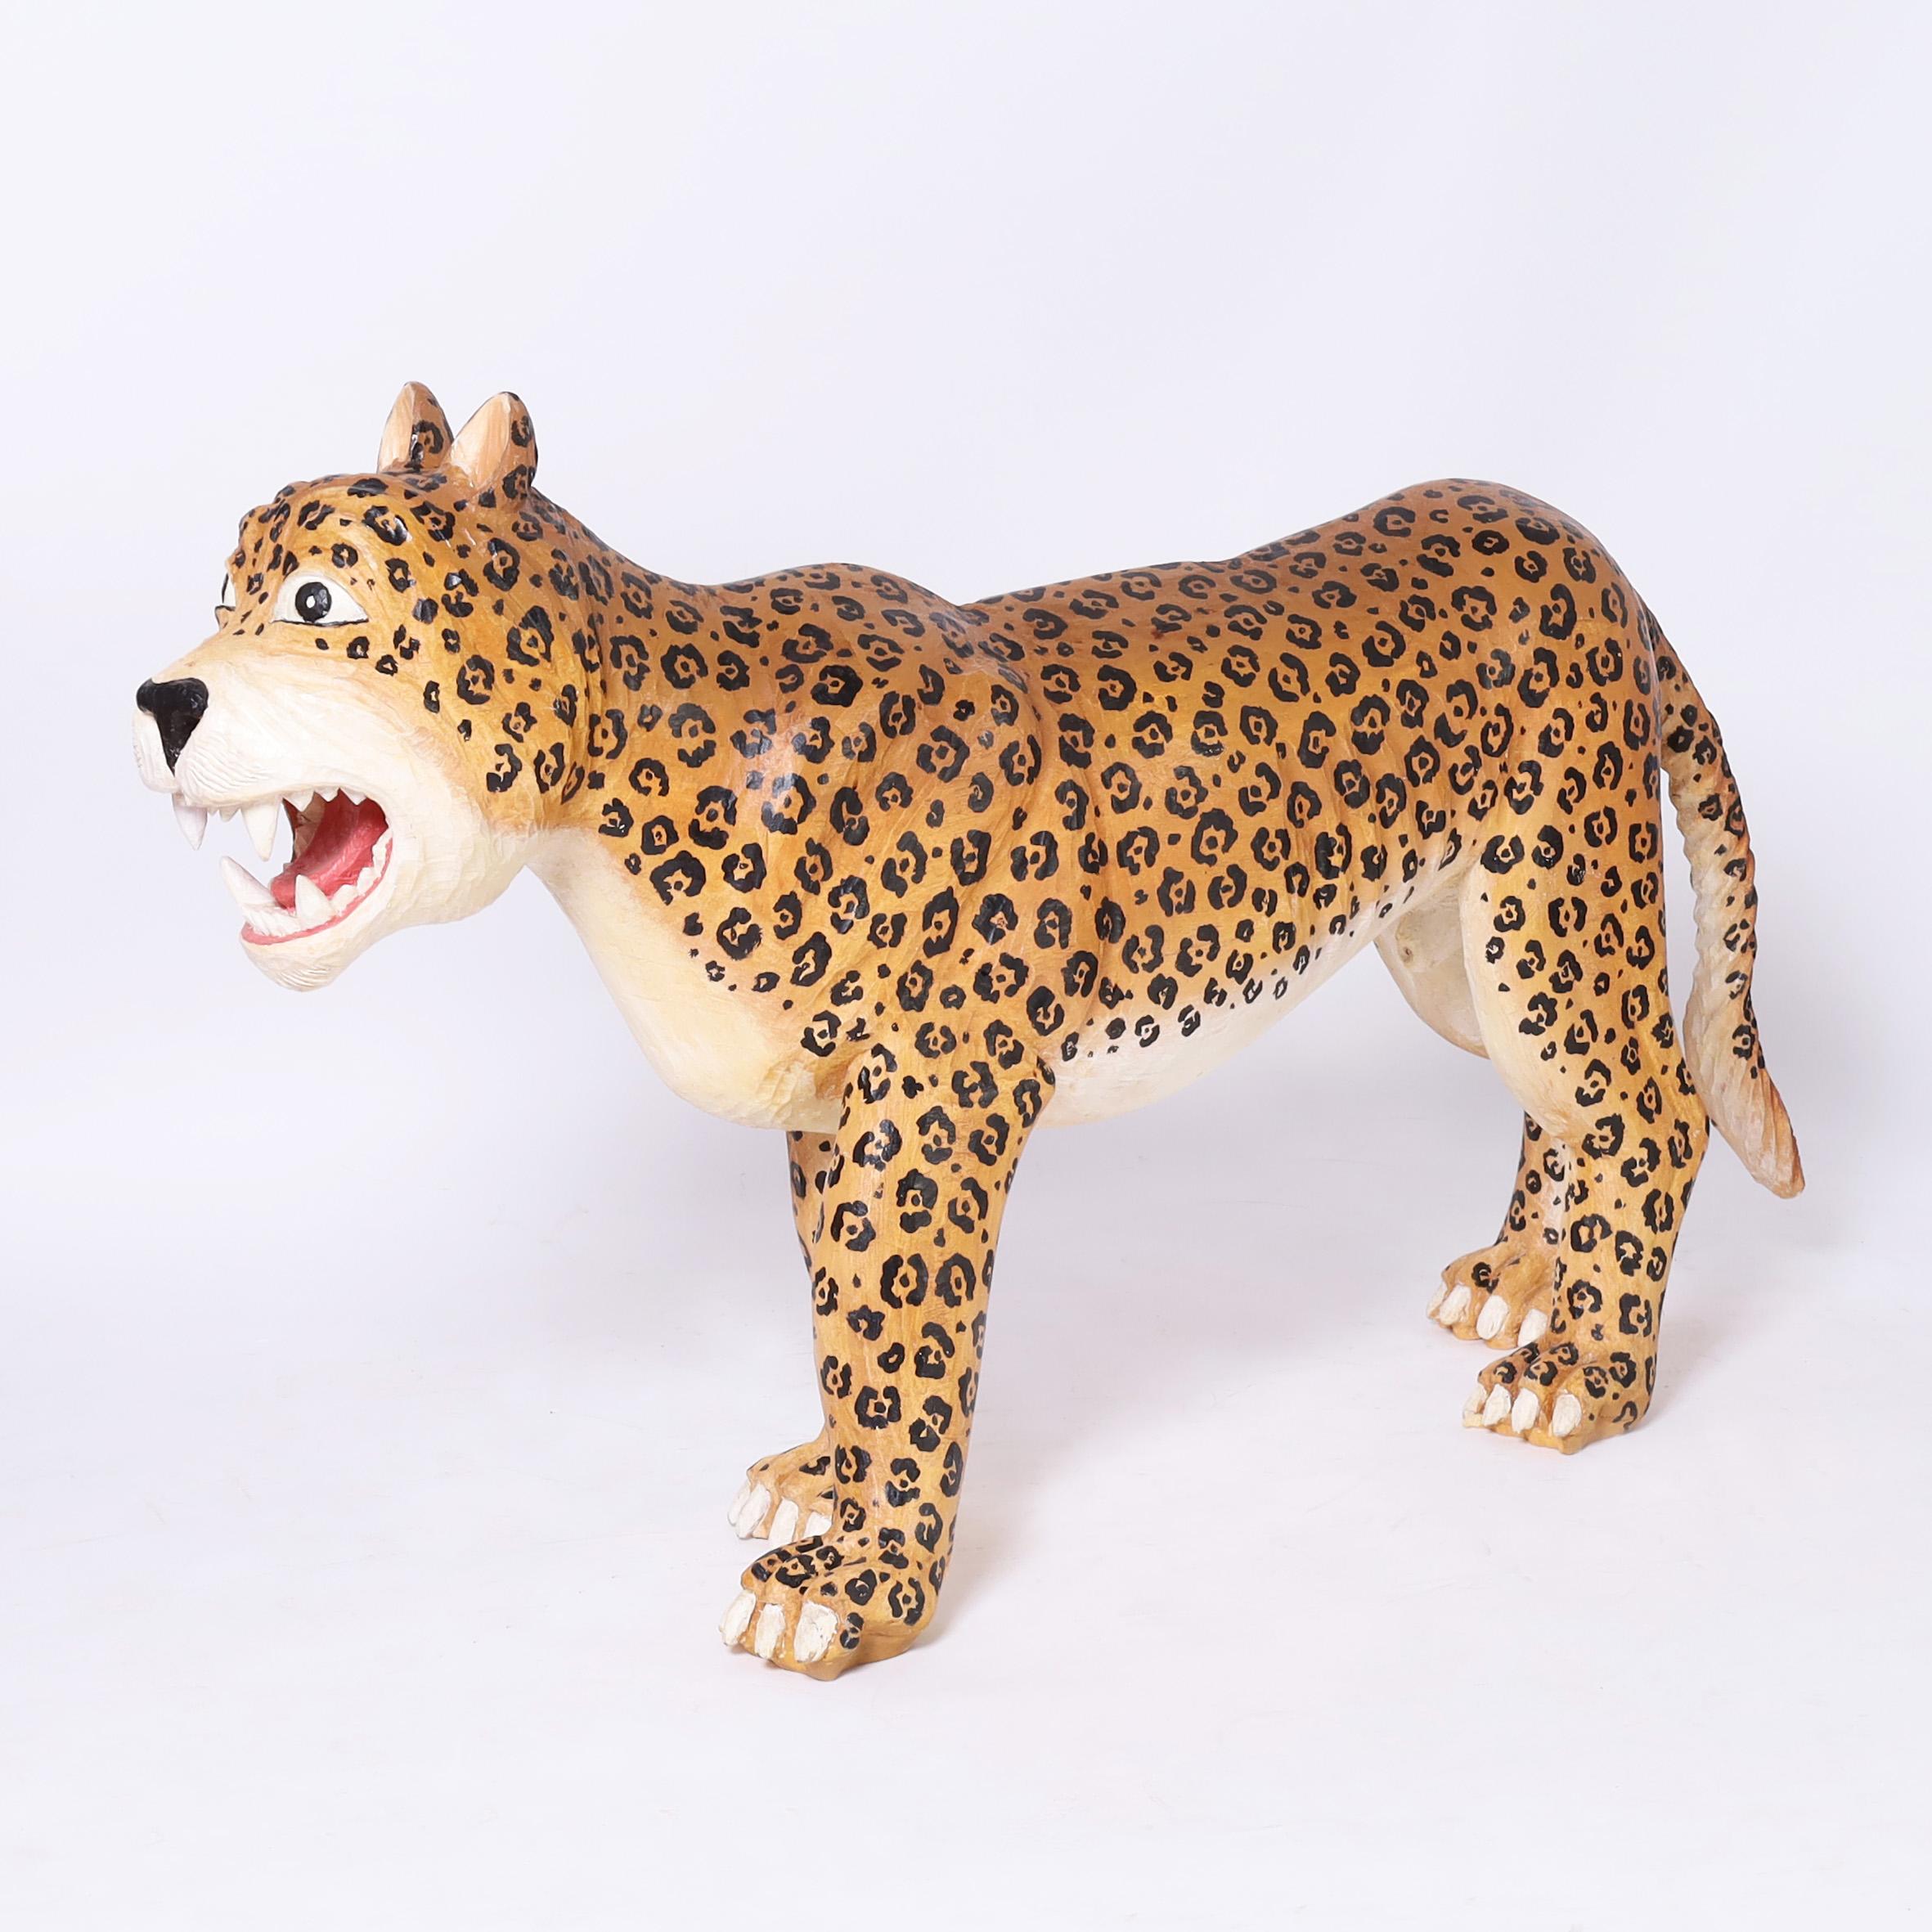 Carved and Painted Wood Jaguar or Big Cat - Sculpture by Unknown